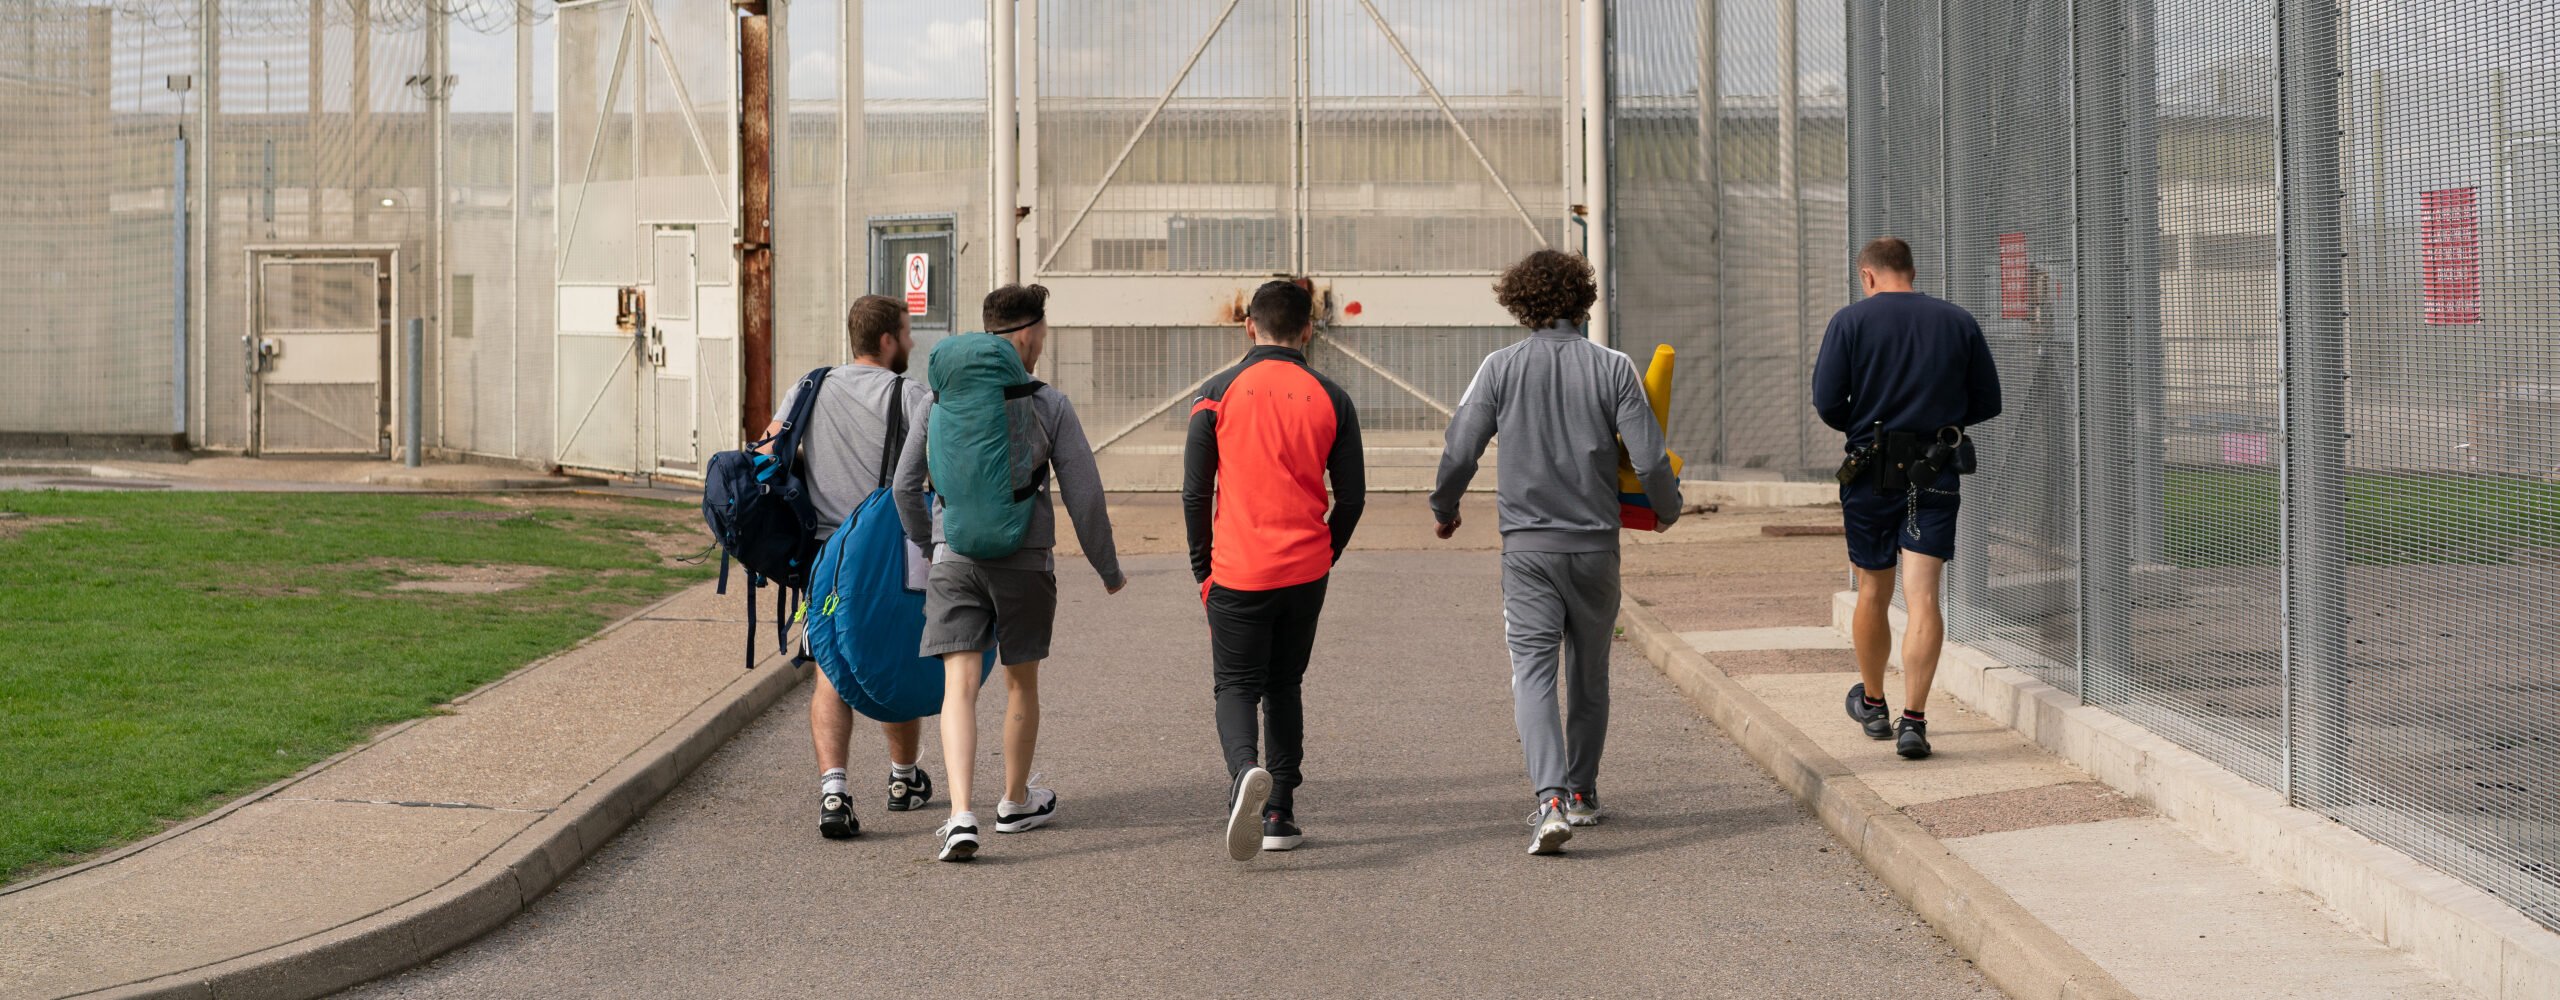 4 young offenders and a prison officer walking towards some gates.